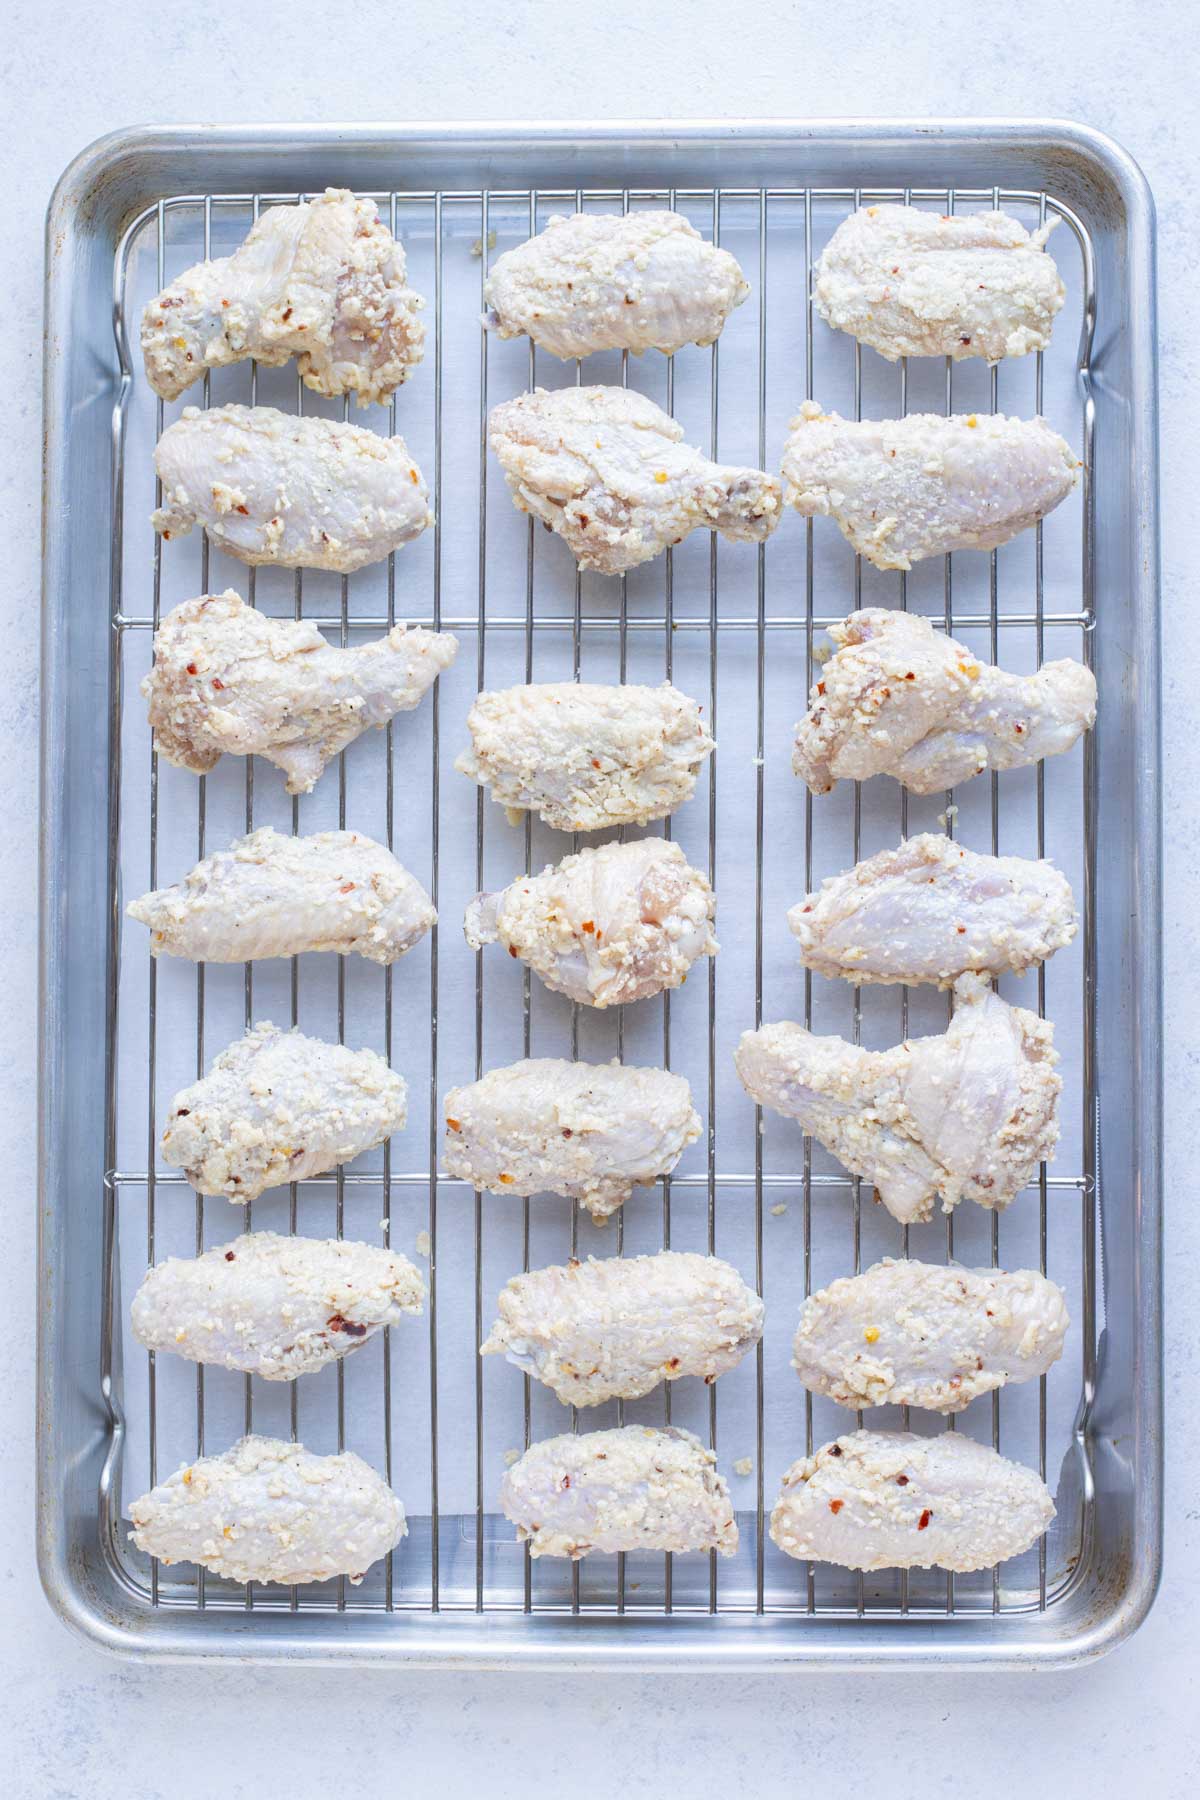 Oven-baked wings are placed on a wire rack before baking.